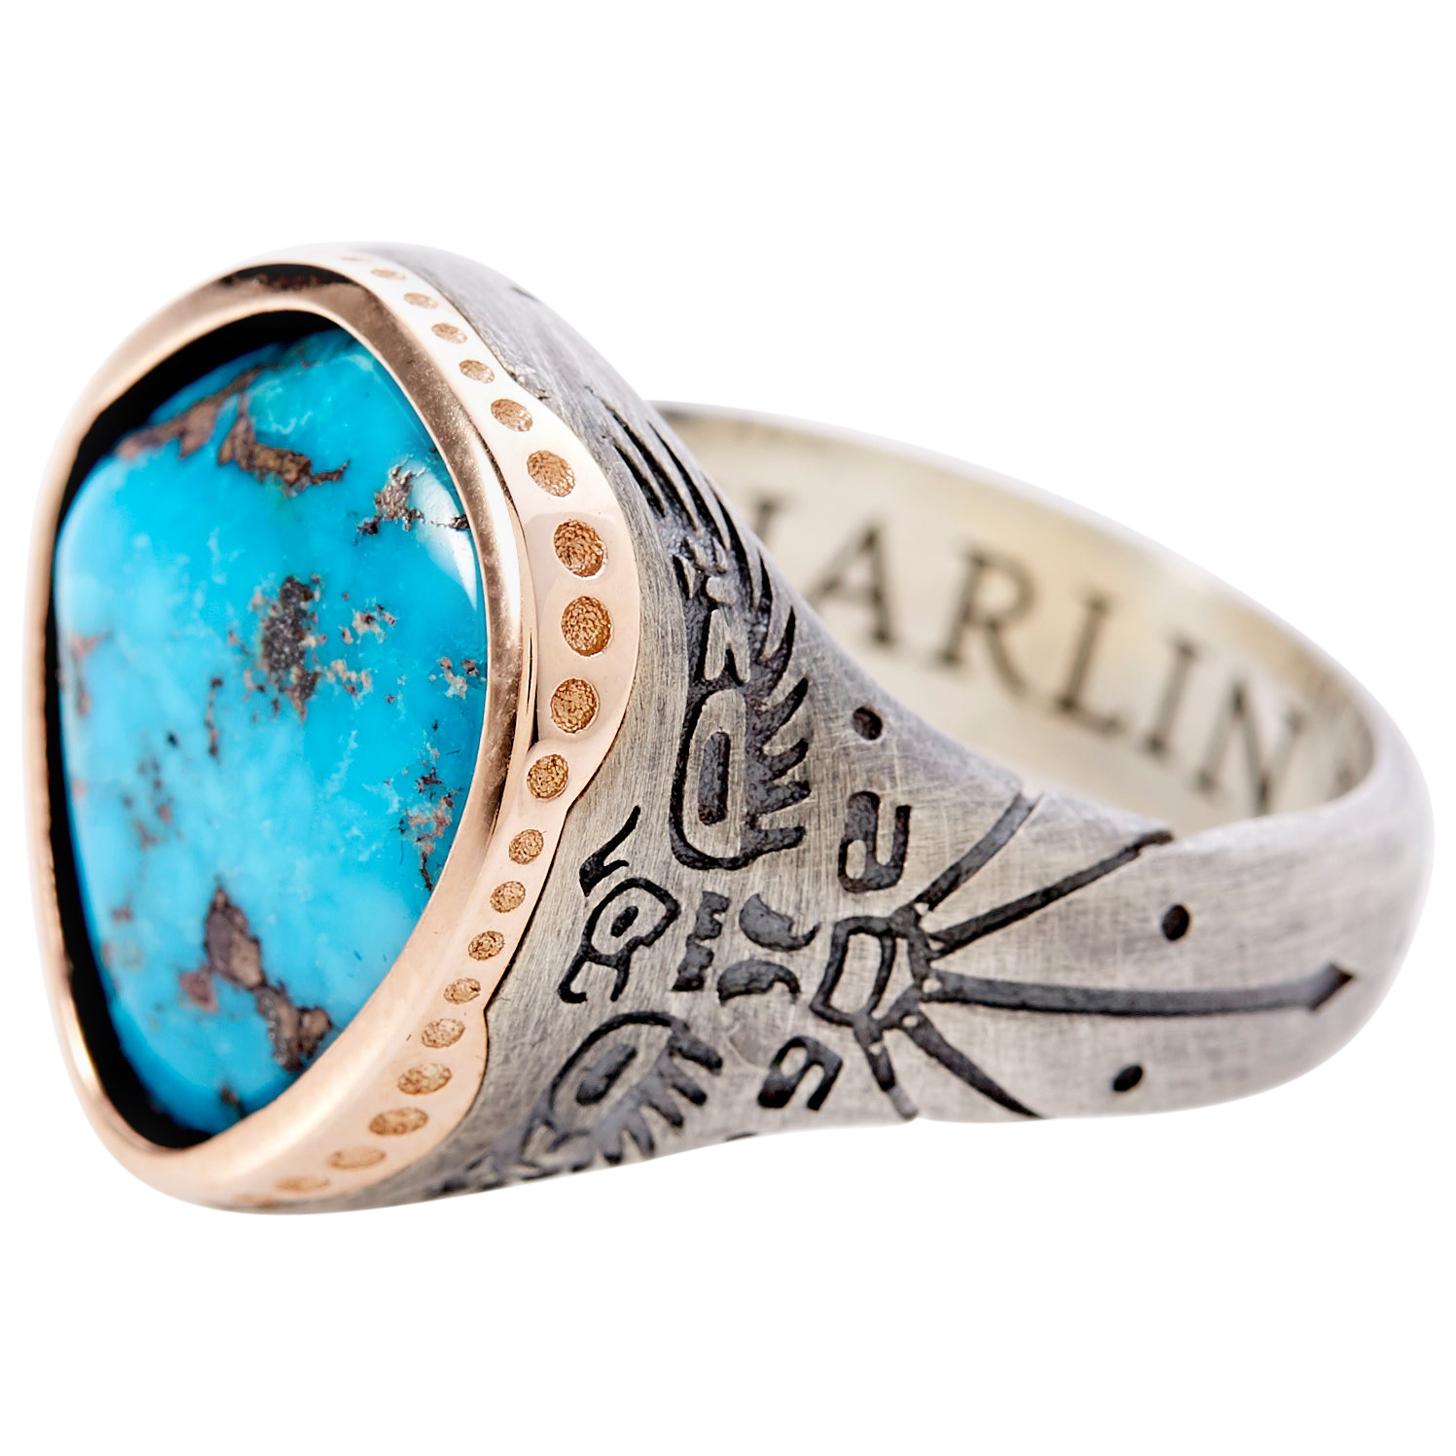 Thunderbird Rose Gold or Sterling Silver Morenci Turquoise Ring by Harlin Jones For Sale